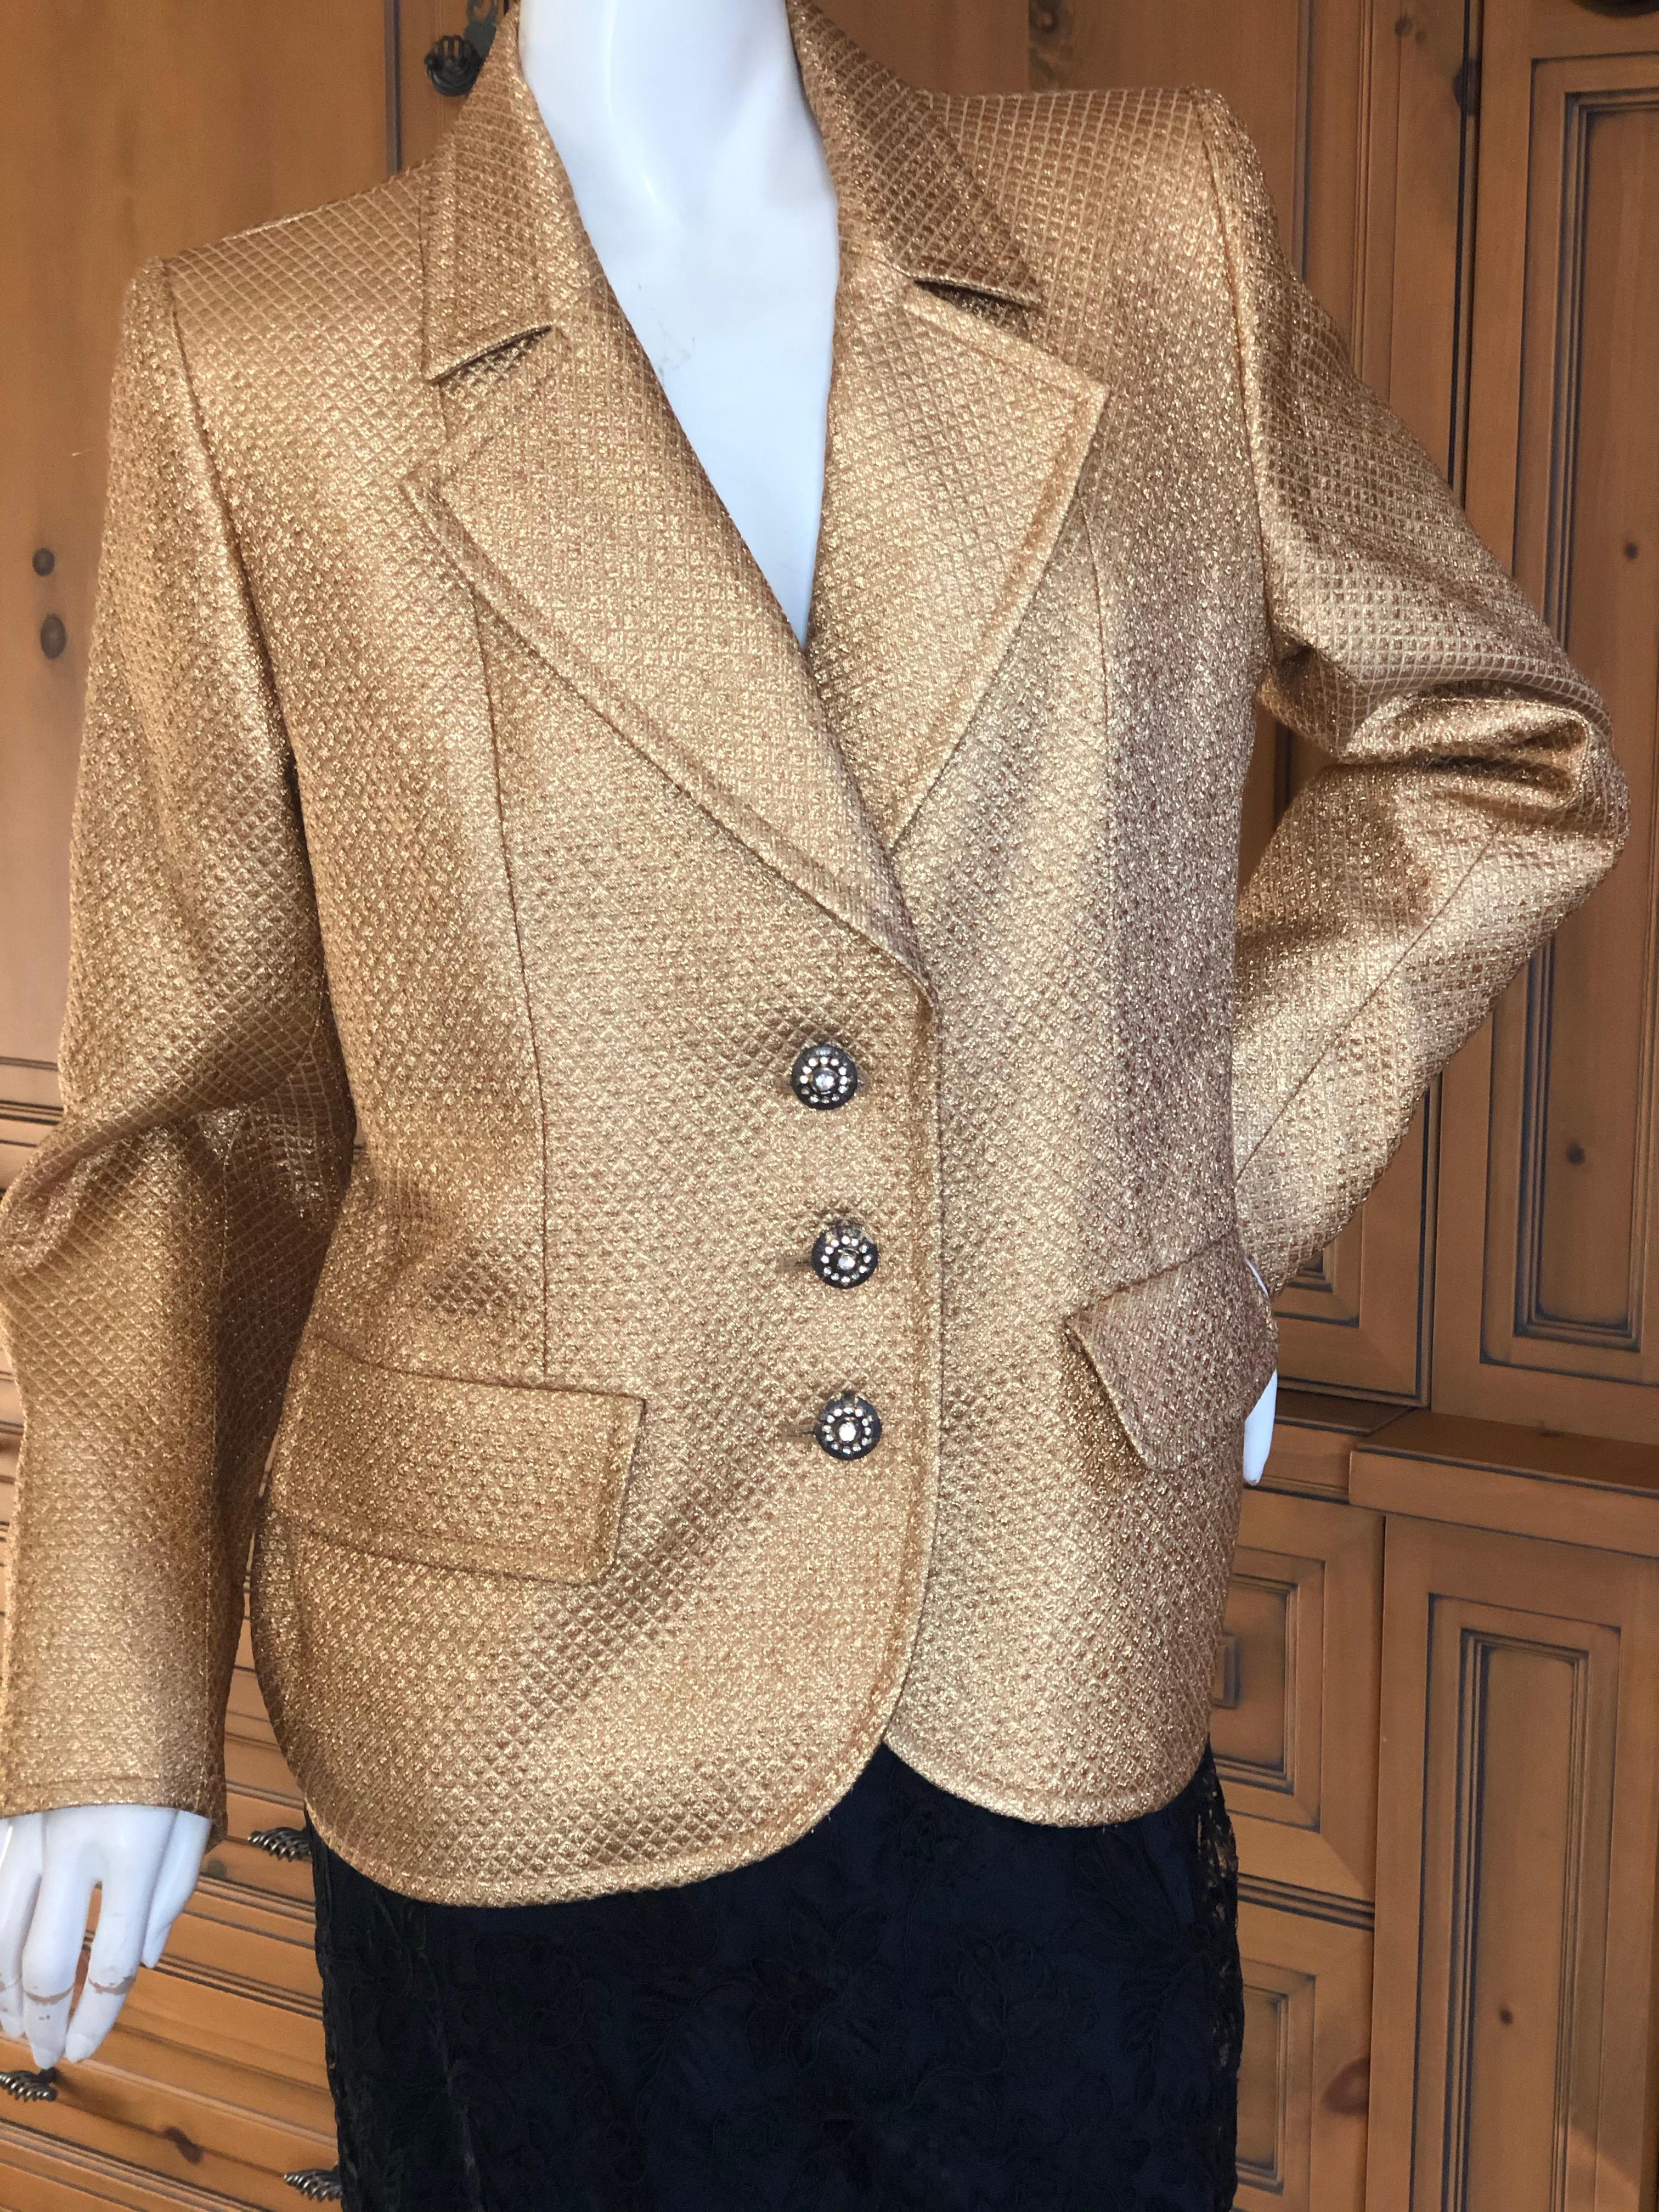 Women's Yves Saint Laurent 1980's Gold Jacquard Jacket with Crystal Buttons For Sale